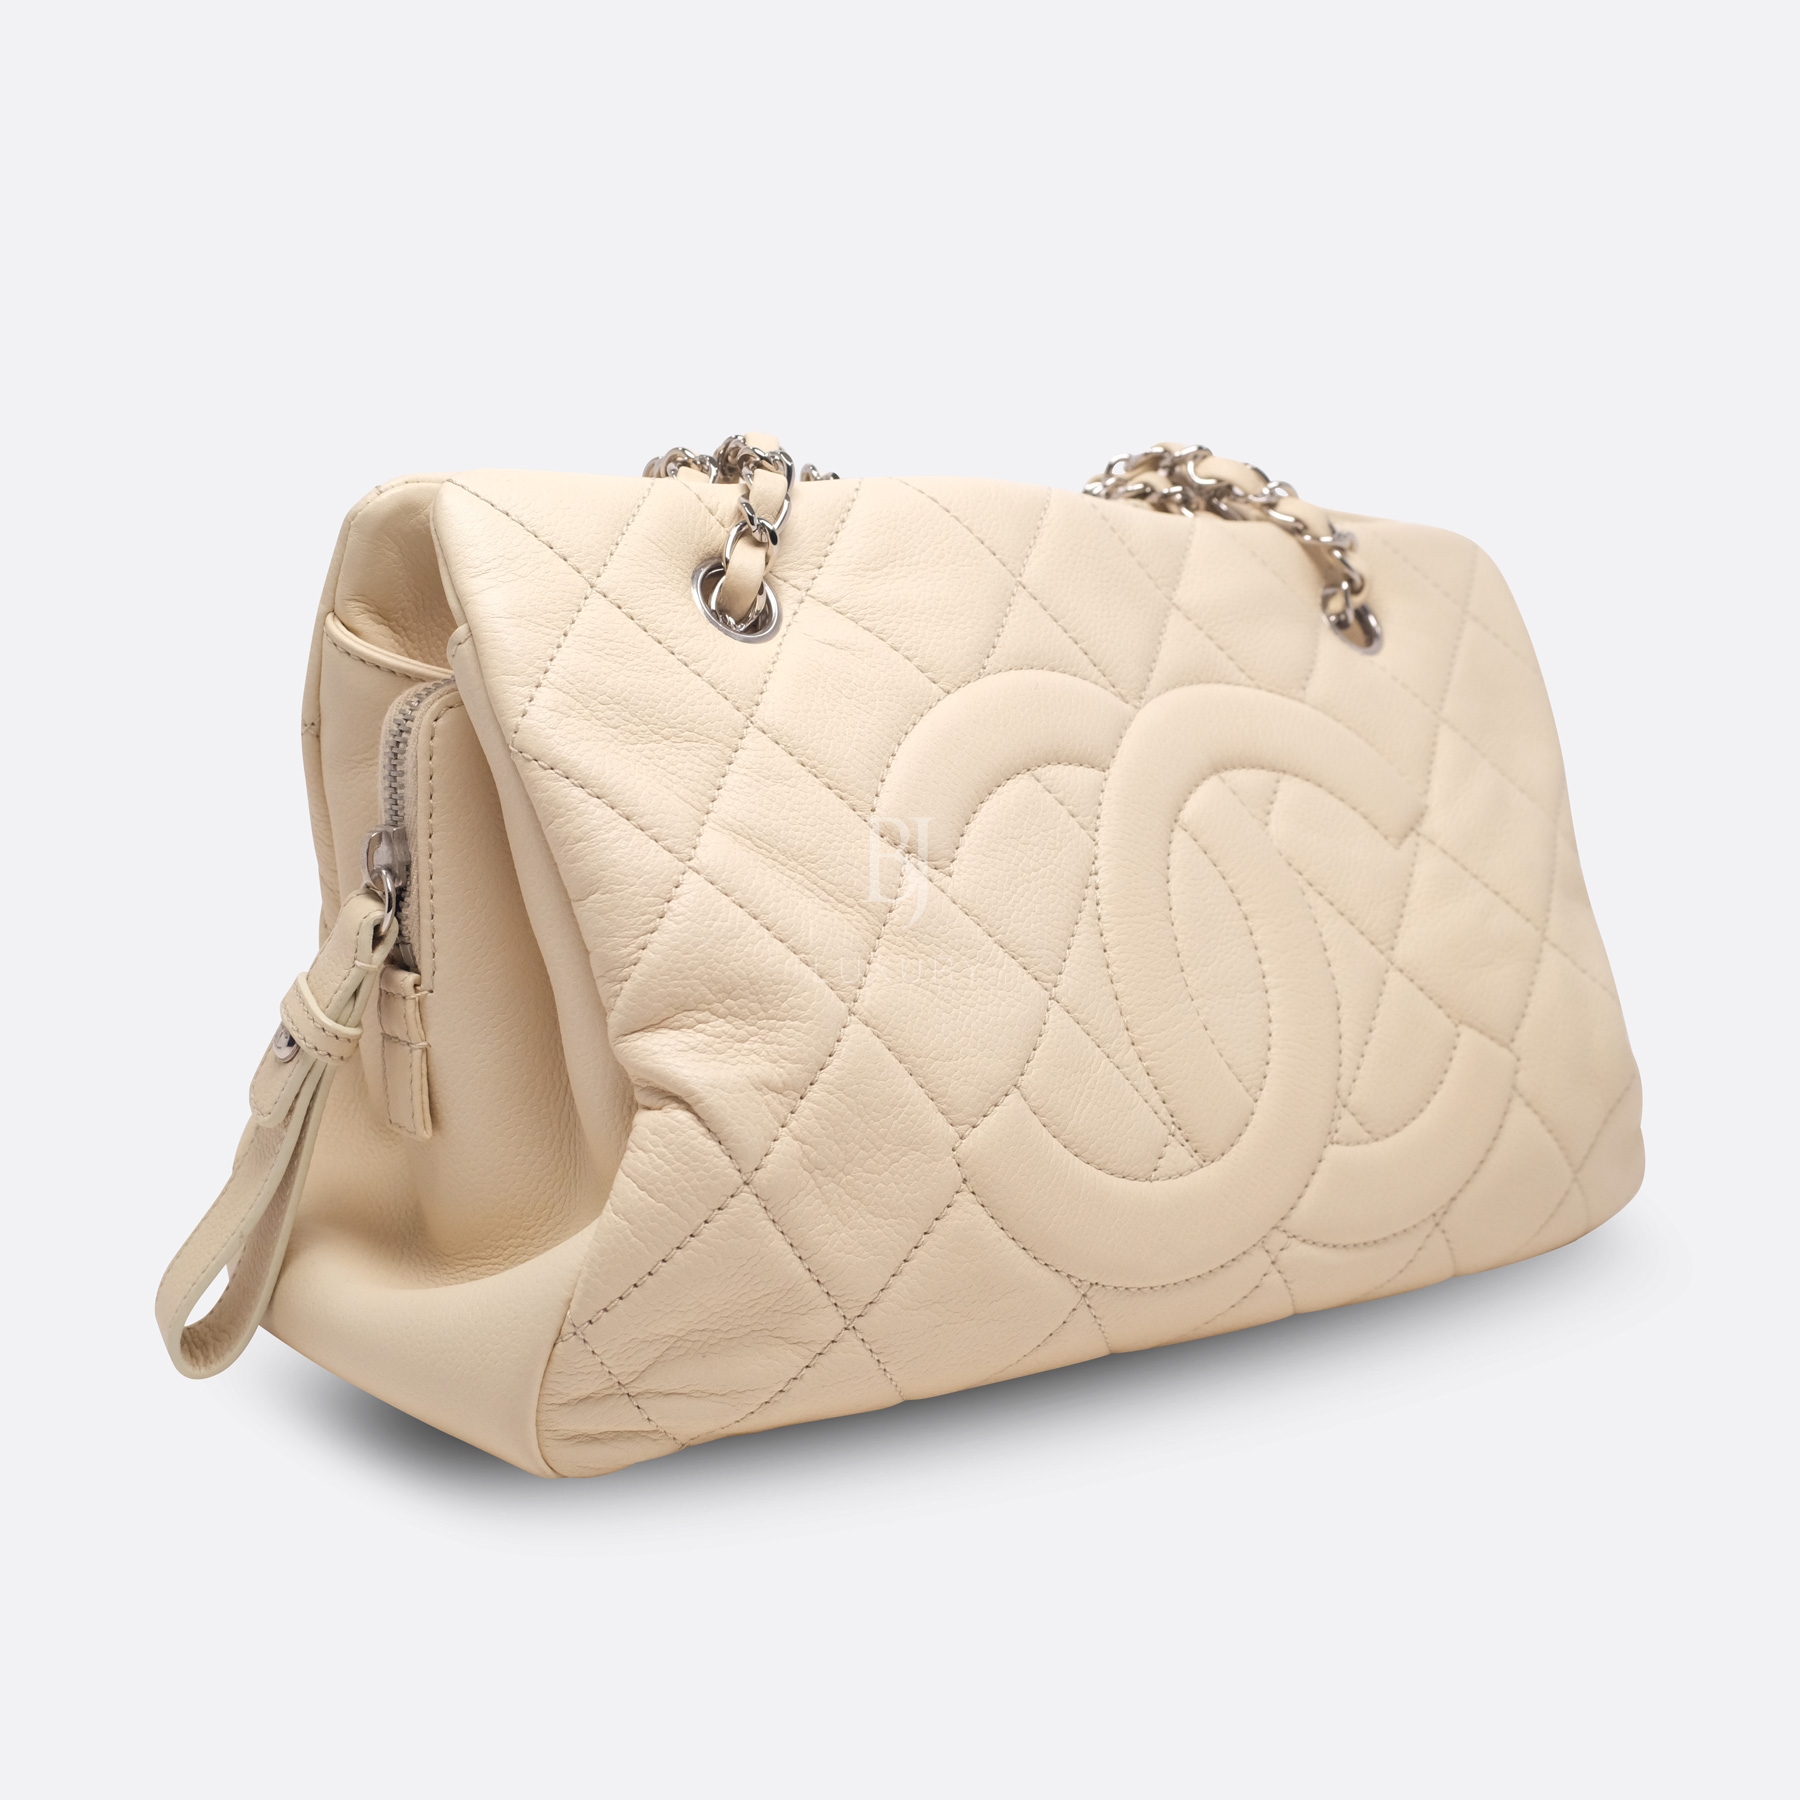 CHANEL TOTE LARGE BEIGE CAVIAR